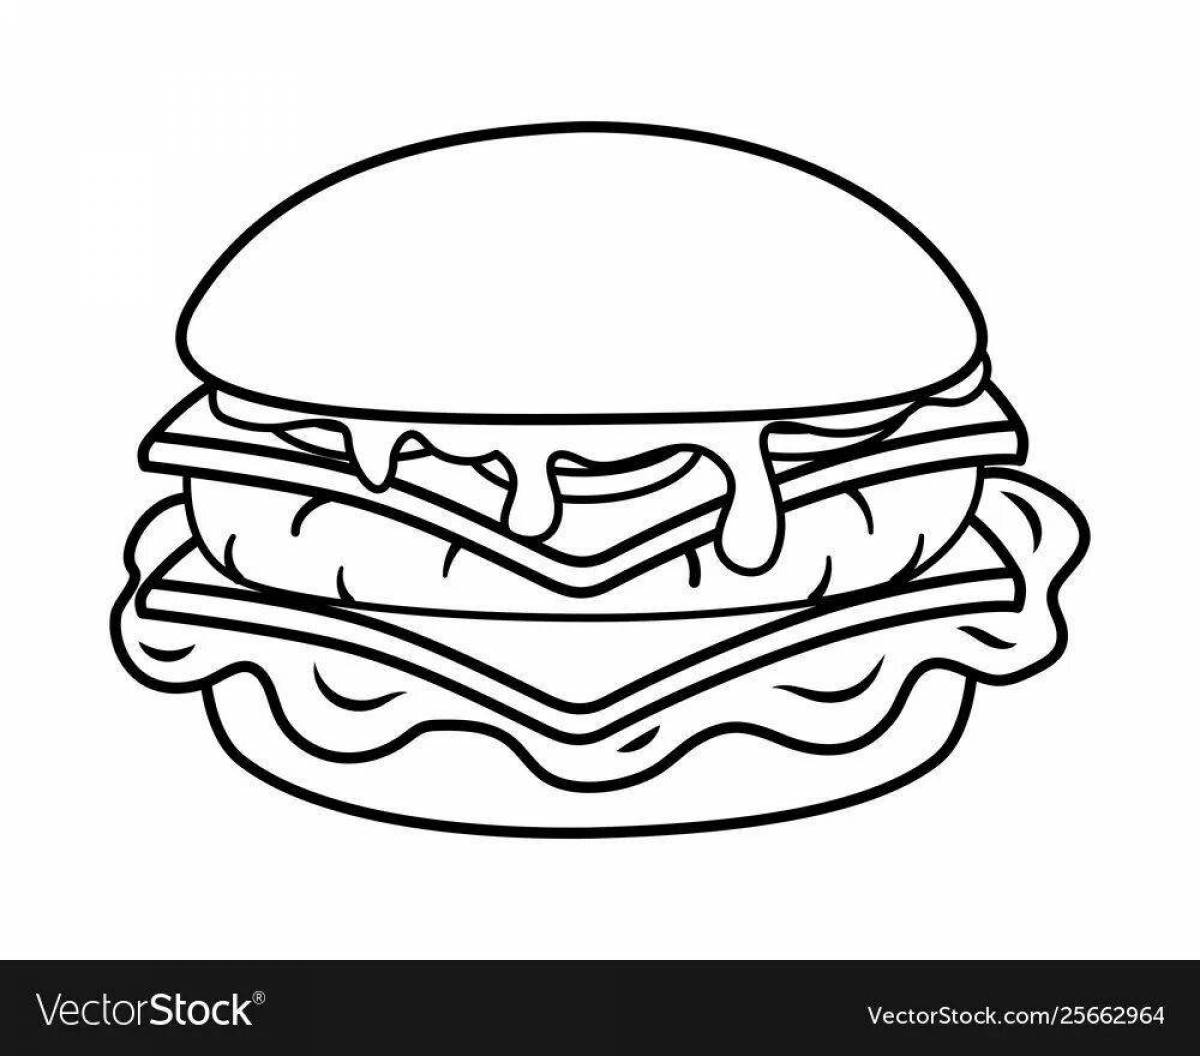 Amazing boxy boo burger coloring page